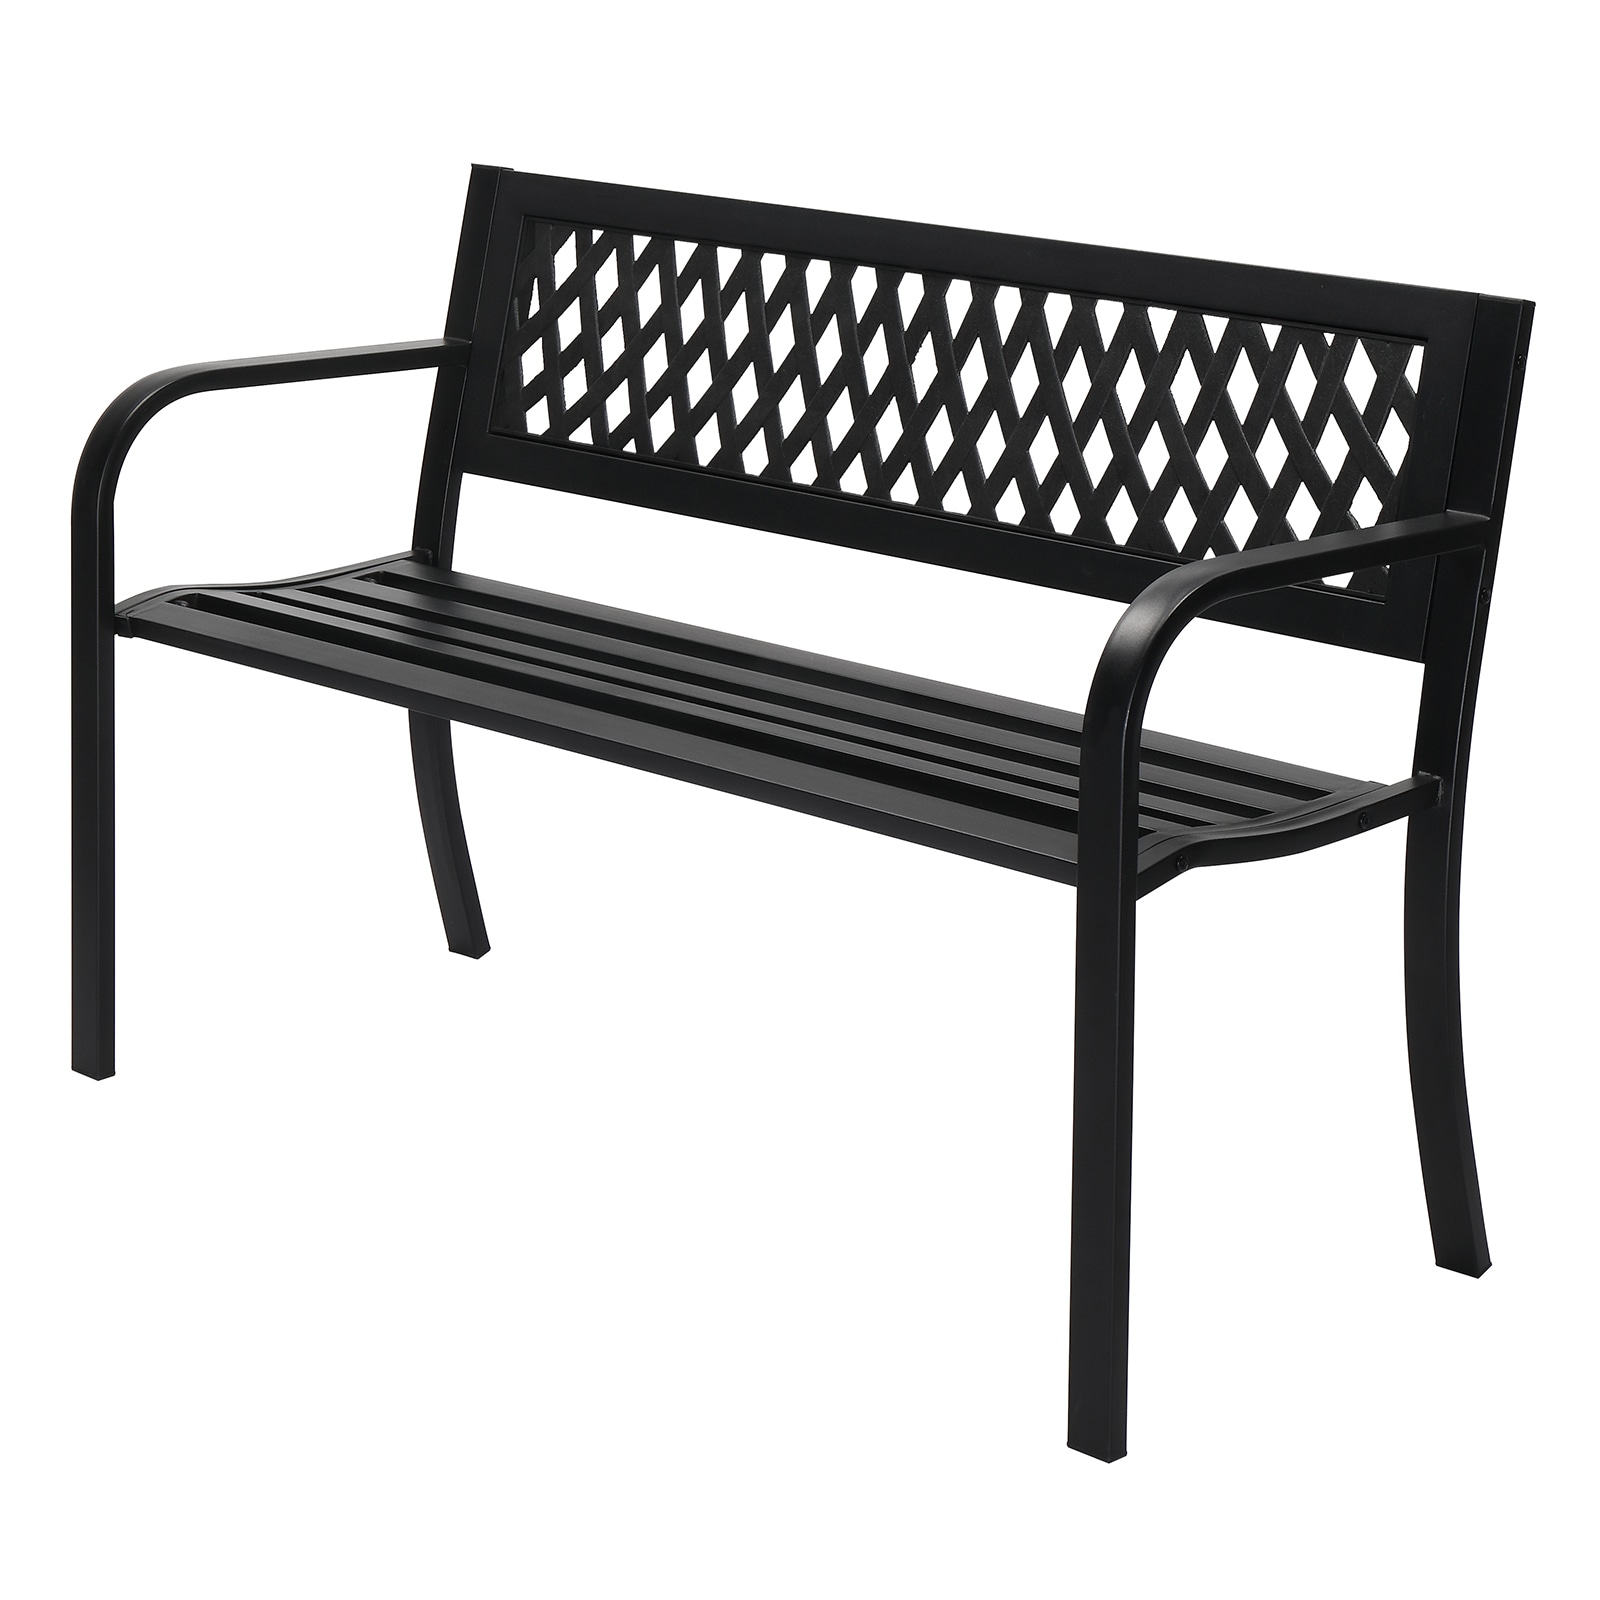 Winado 47-in W x 30.1-in H Black Iron Garden Bench in the Patio Benches ...